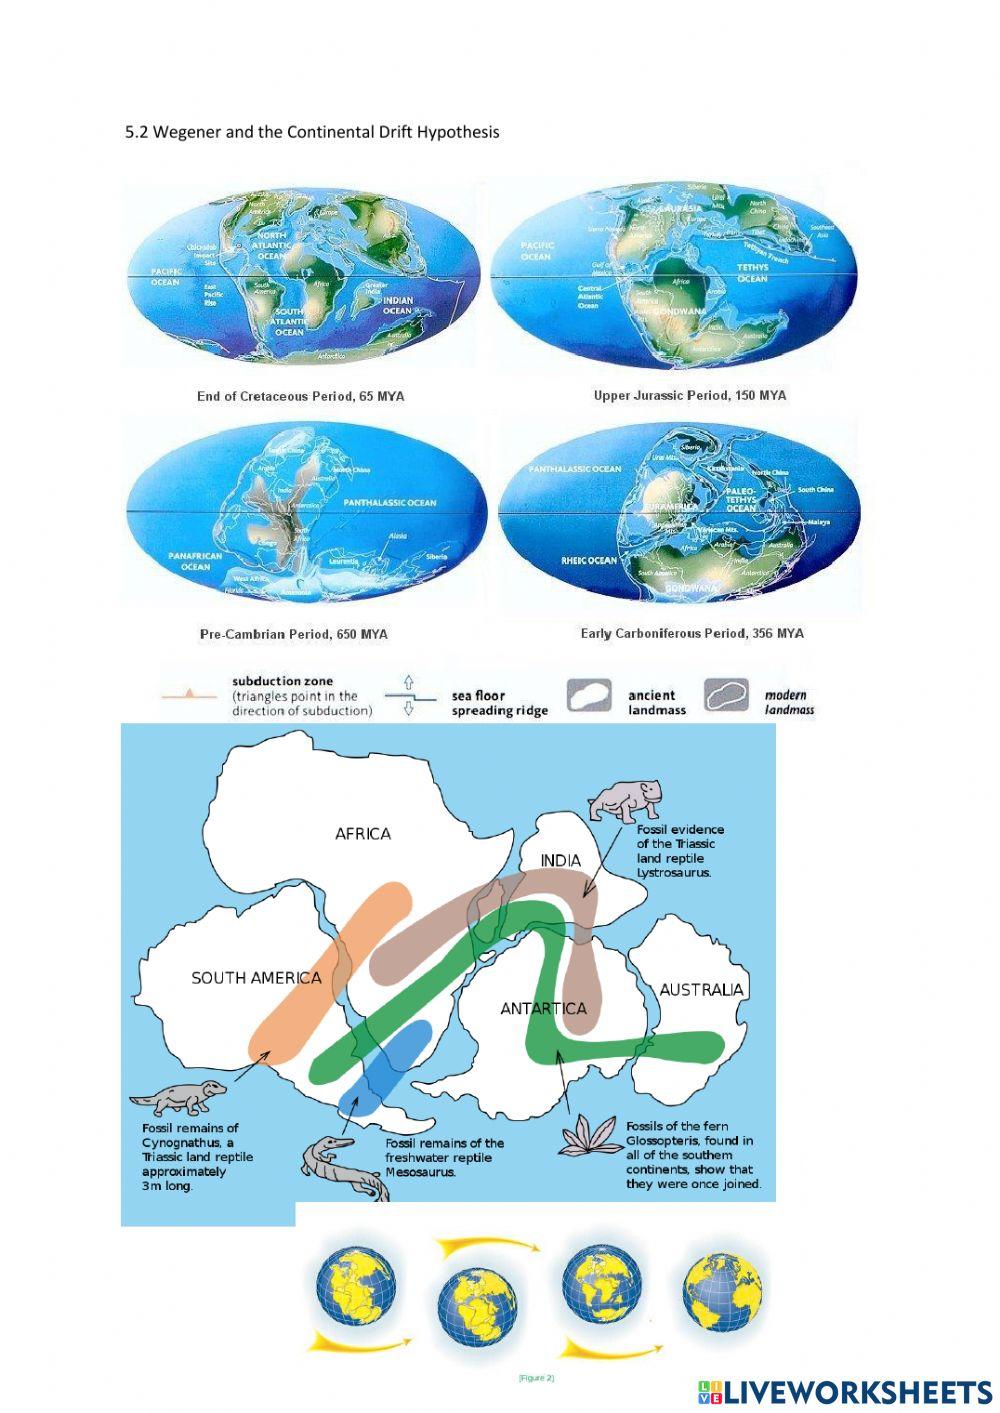 5.2 Wegener and the Continental Drift Hypothesis